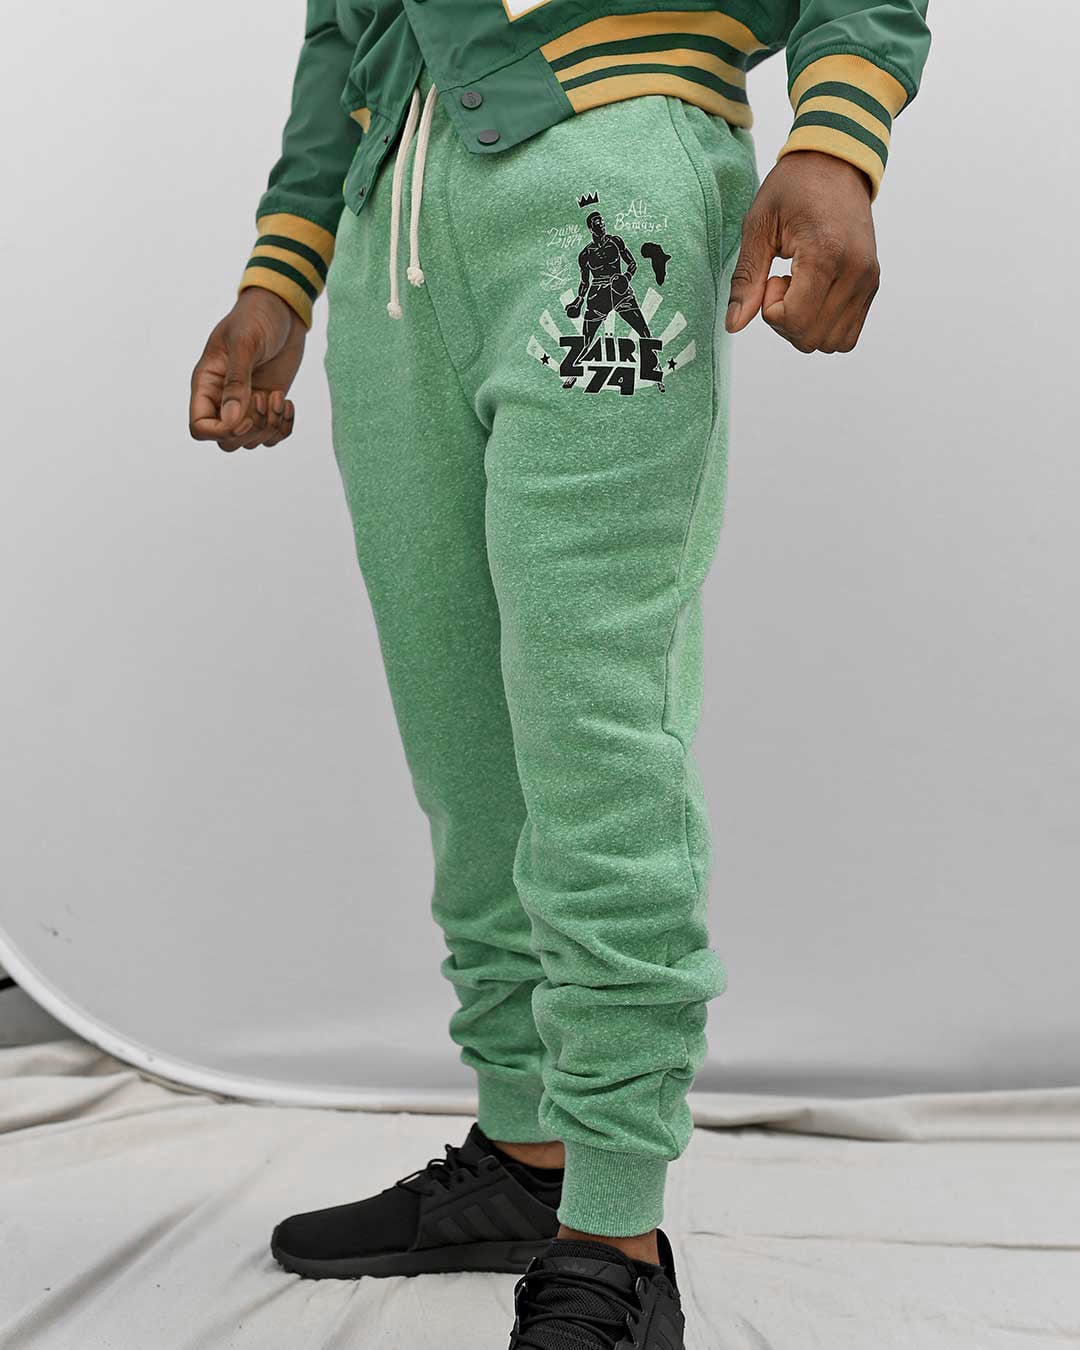 Ali Rumble Zaire 74 Green Sweatpants - Roots of Fight